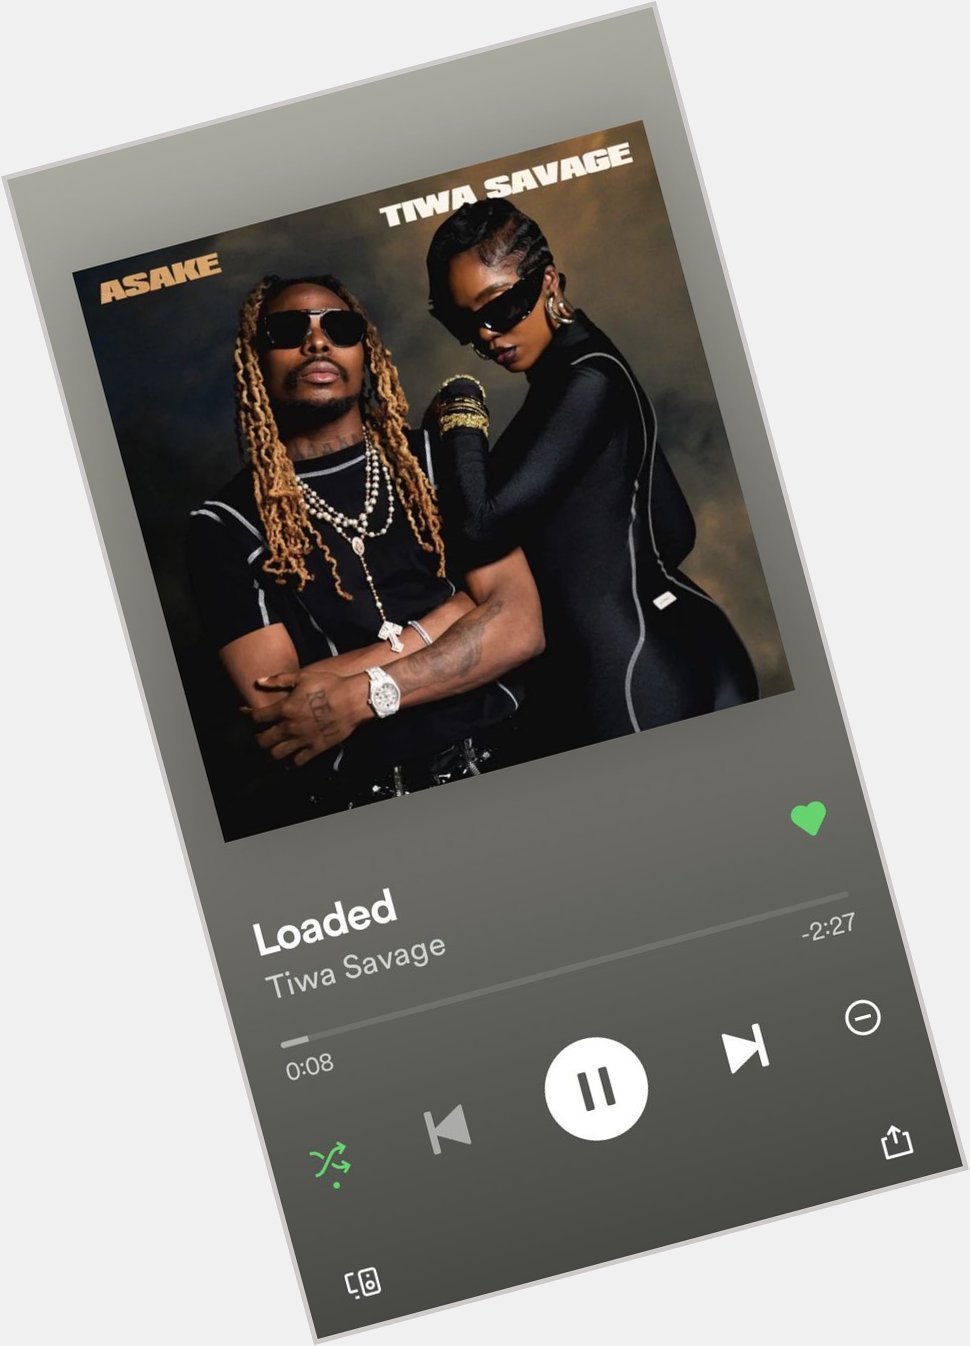 Happy birthday Tiwa Savage Now Playing: Loaded by ft      